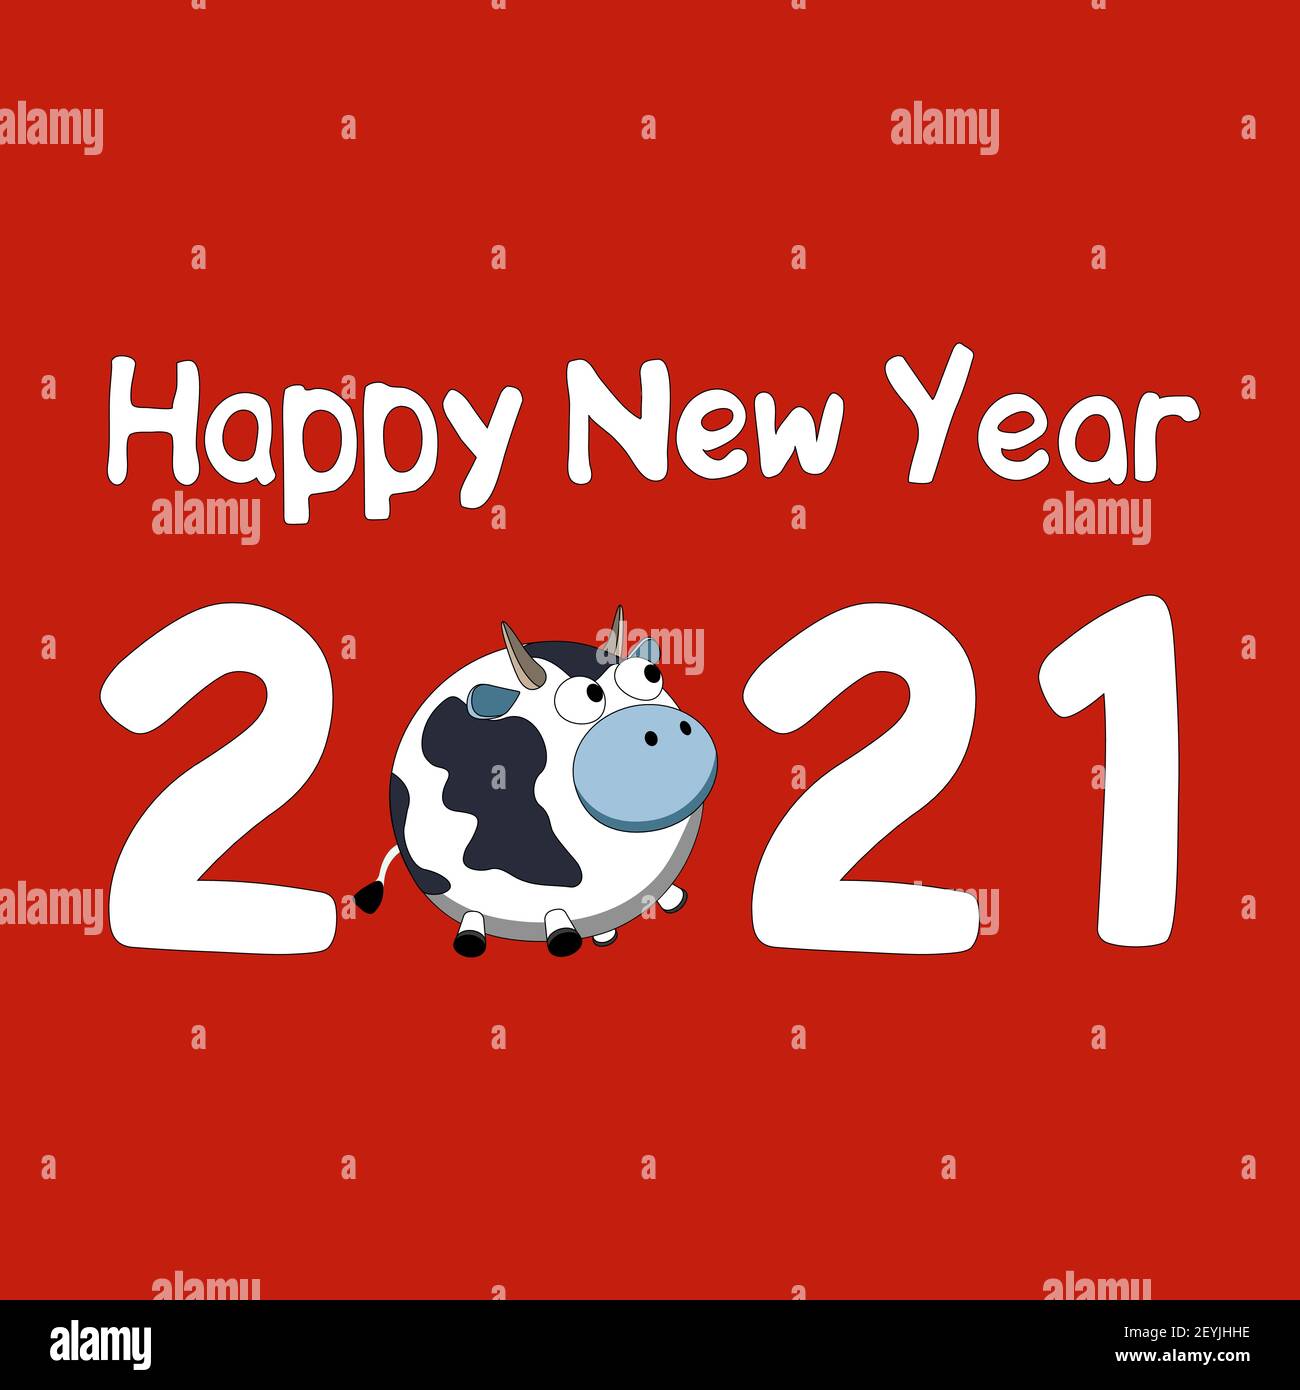 Happy New Year 2021 vector background with white figures and symbol of the year Bull, Ox or Cow. Vision square illustration is suitable for a banner, Stock Vector